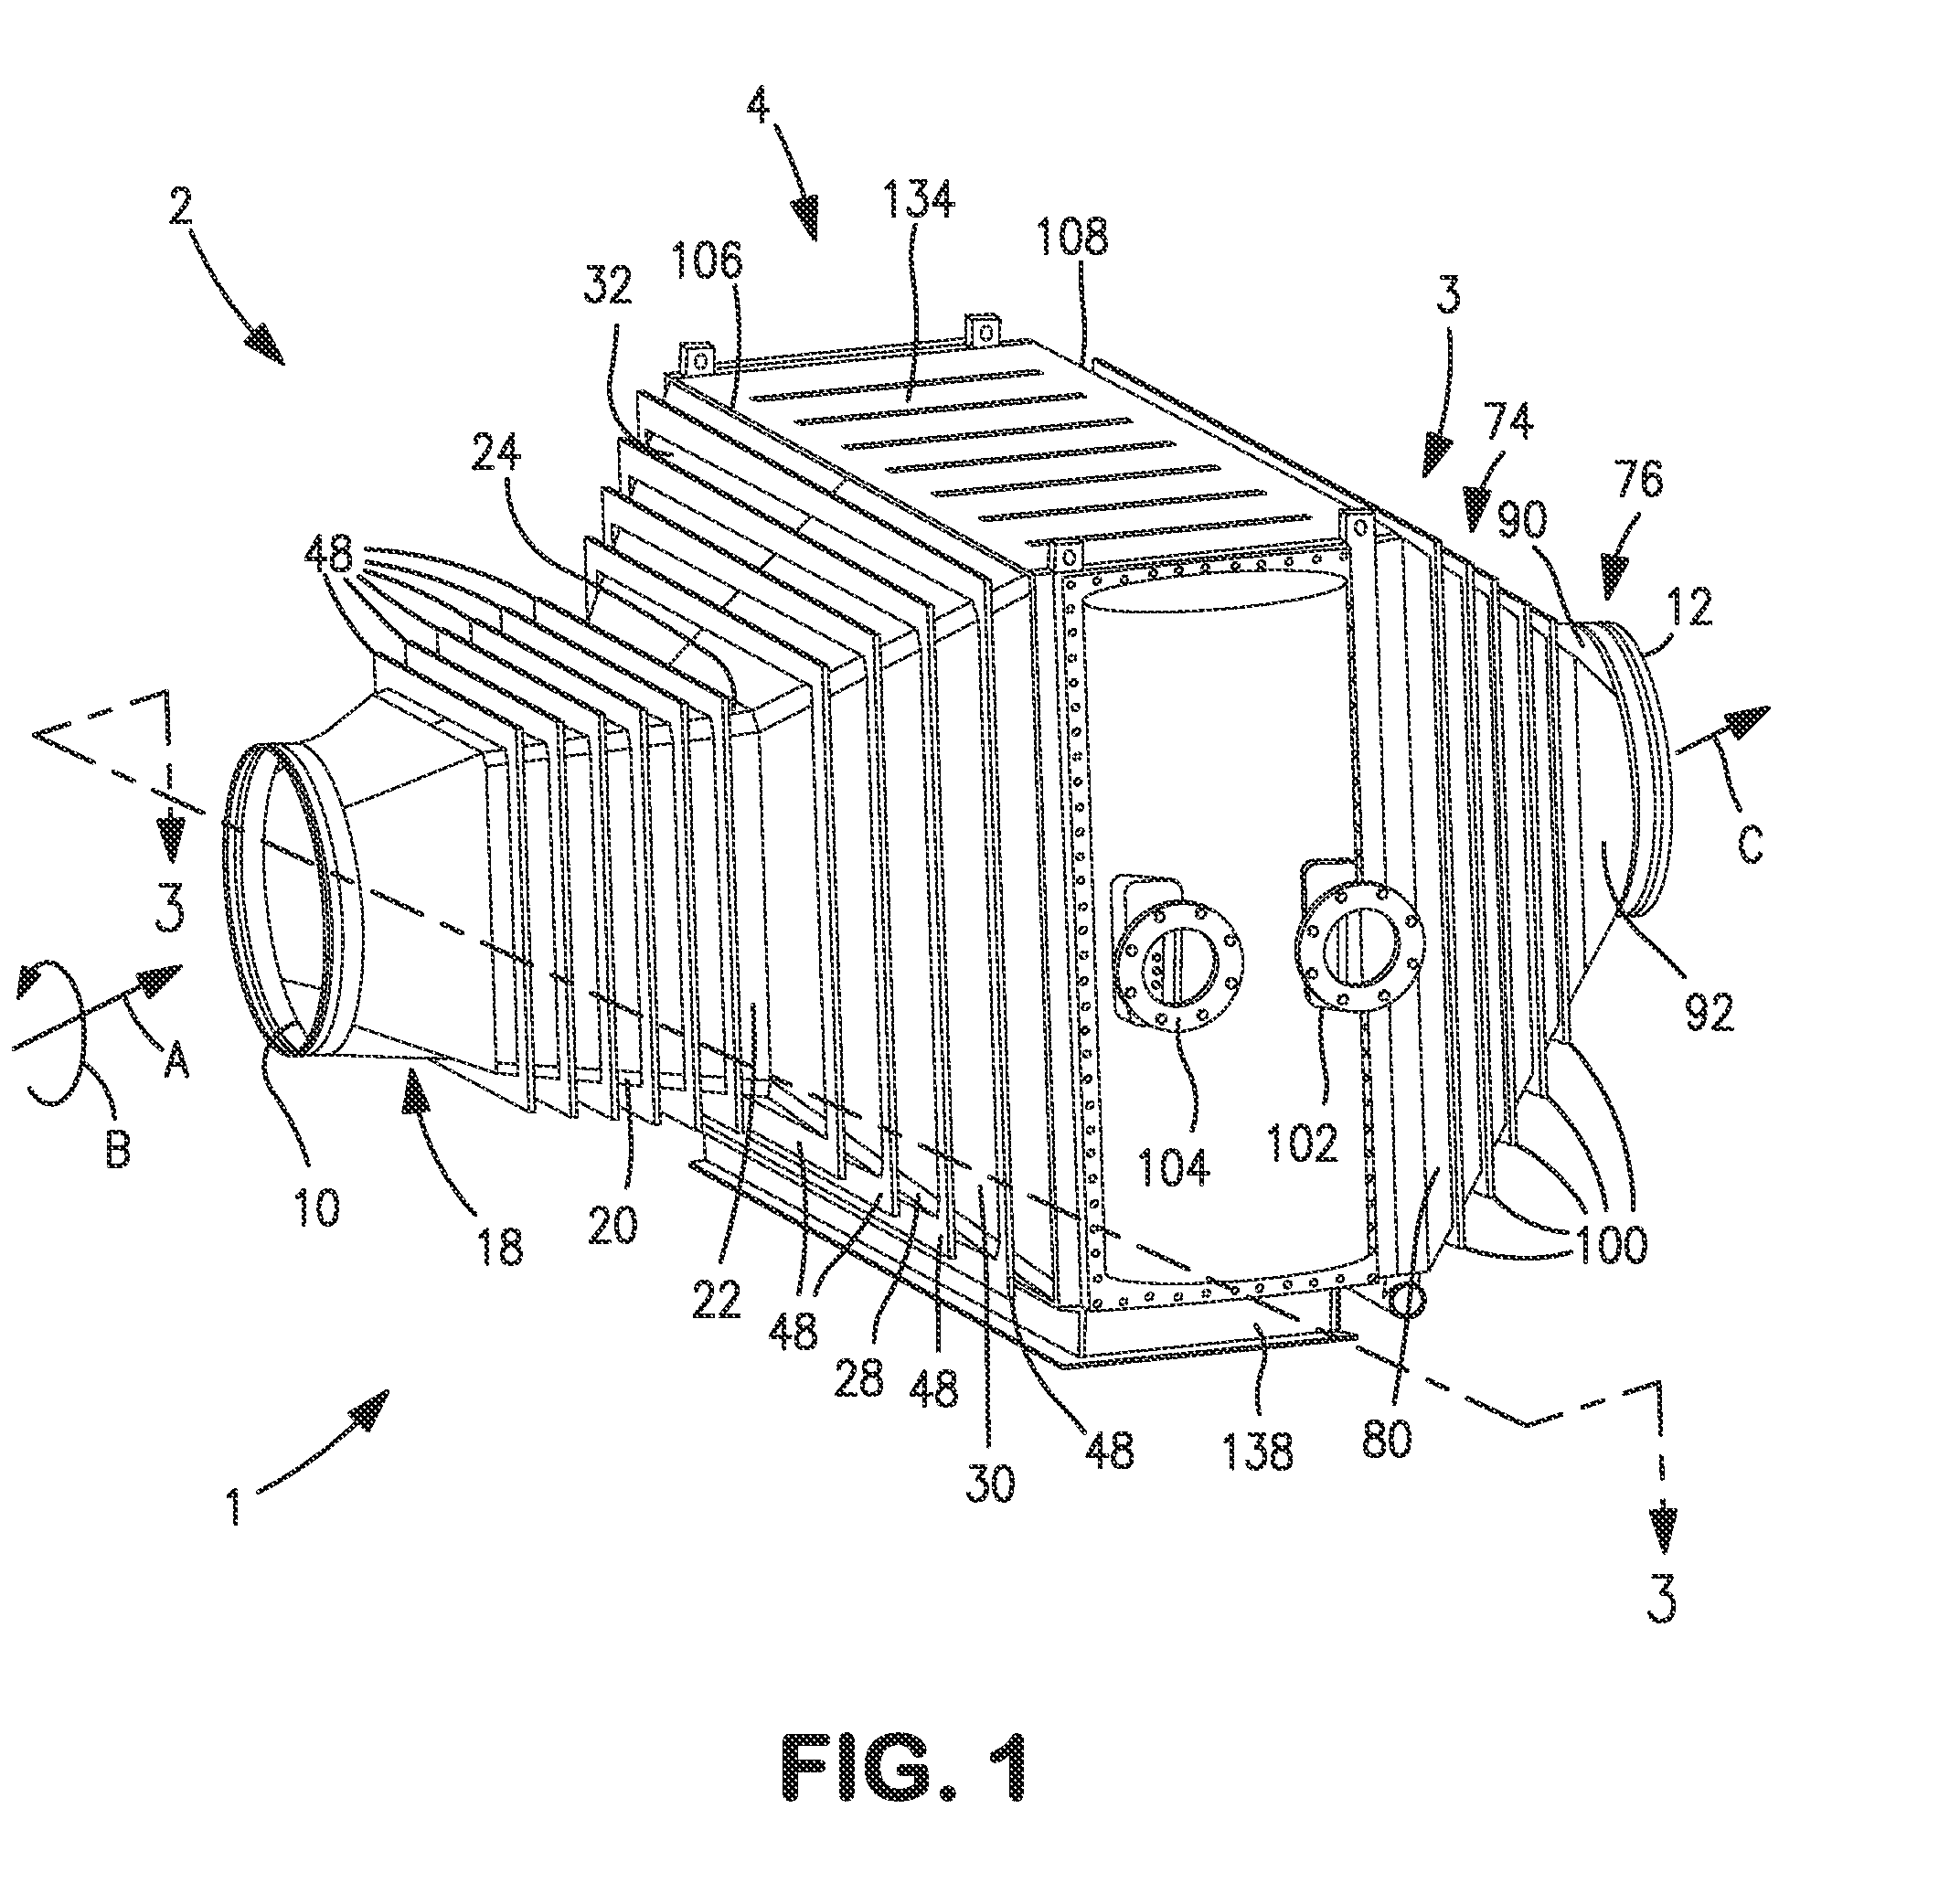 Compressed gas cooling apparatus